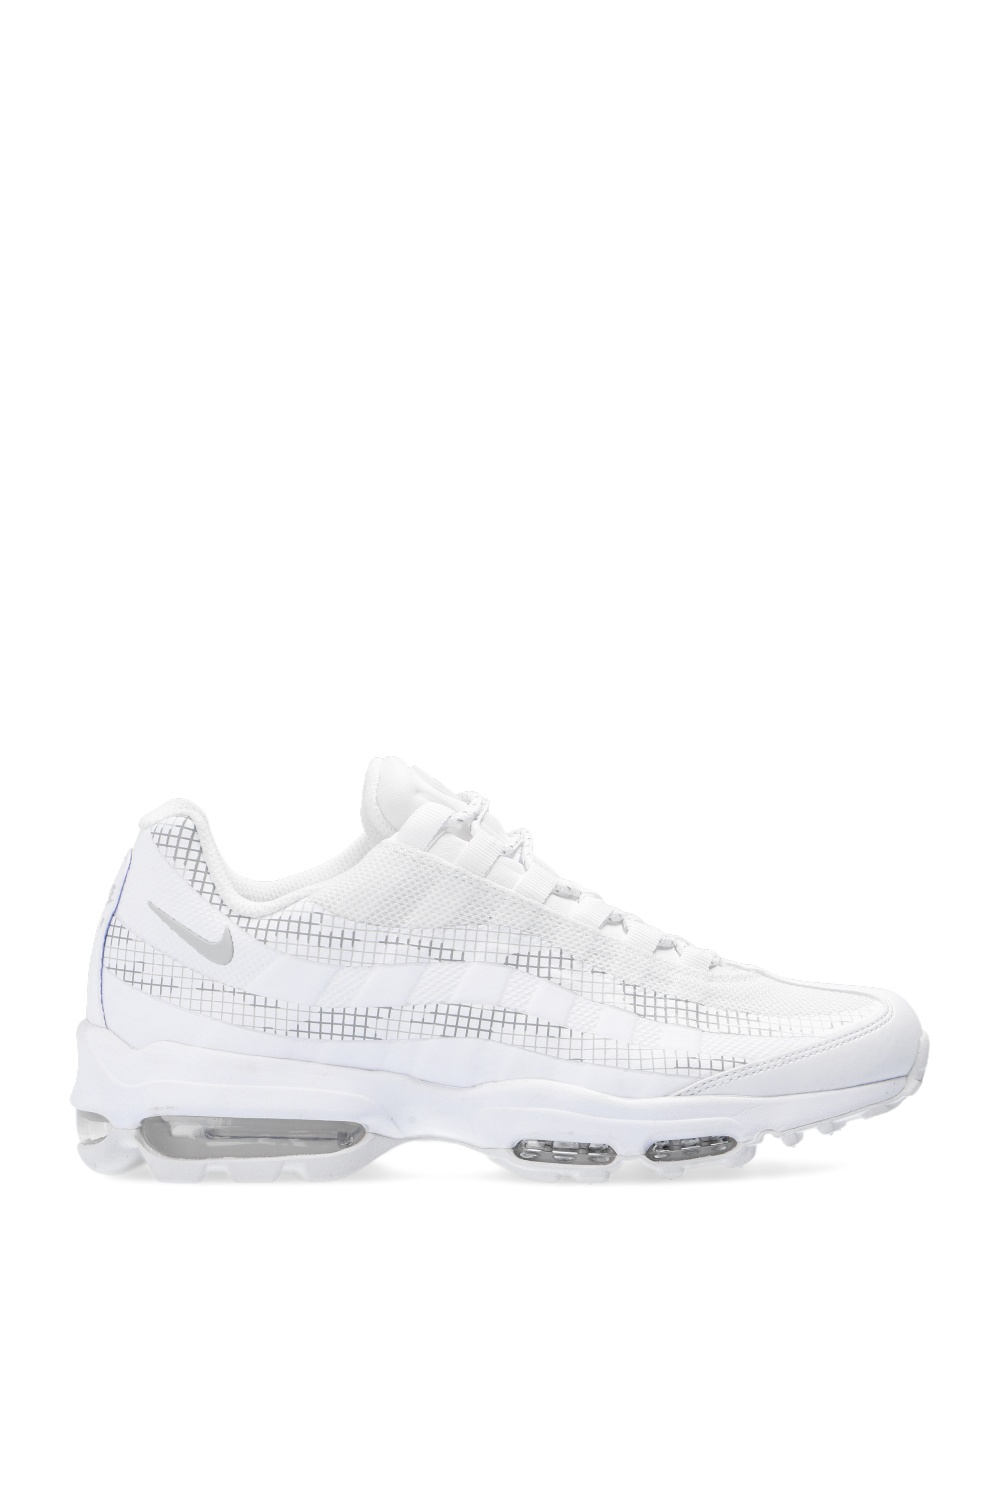 air max 95 size guide